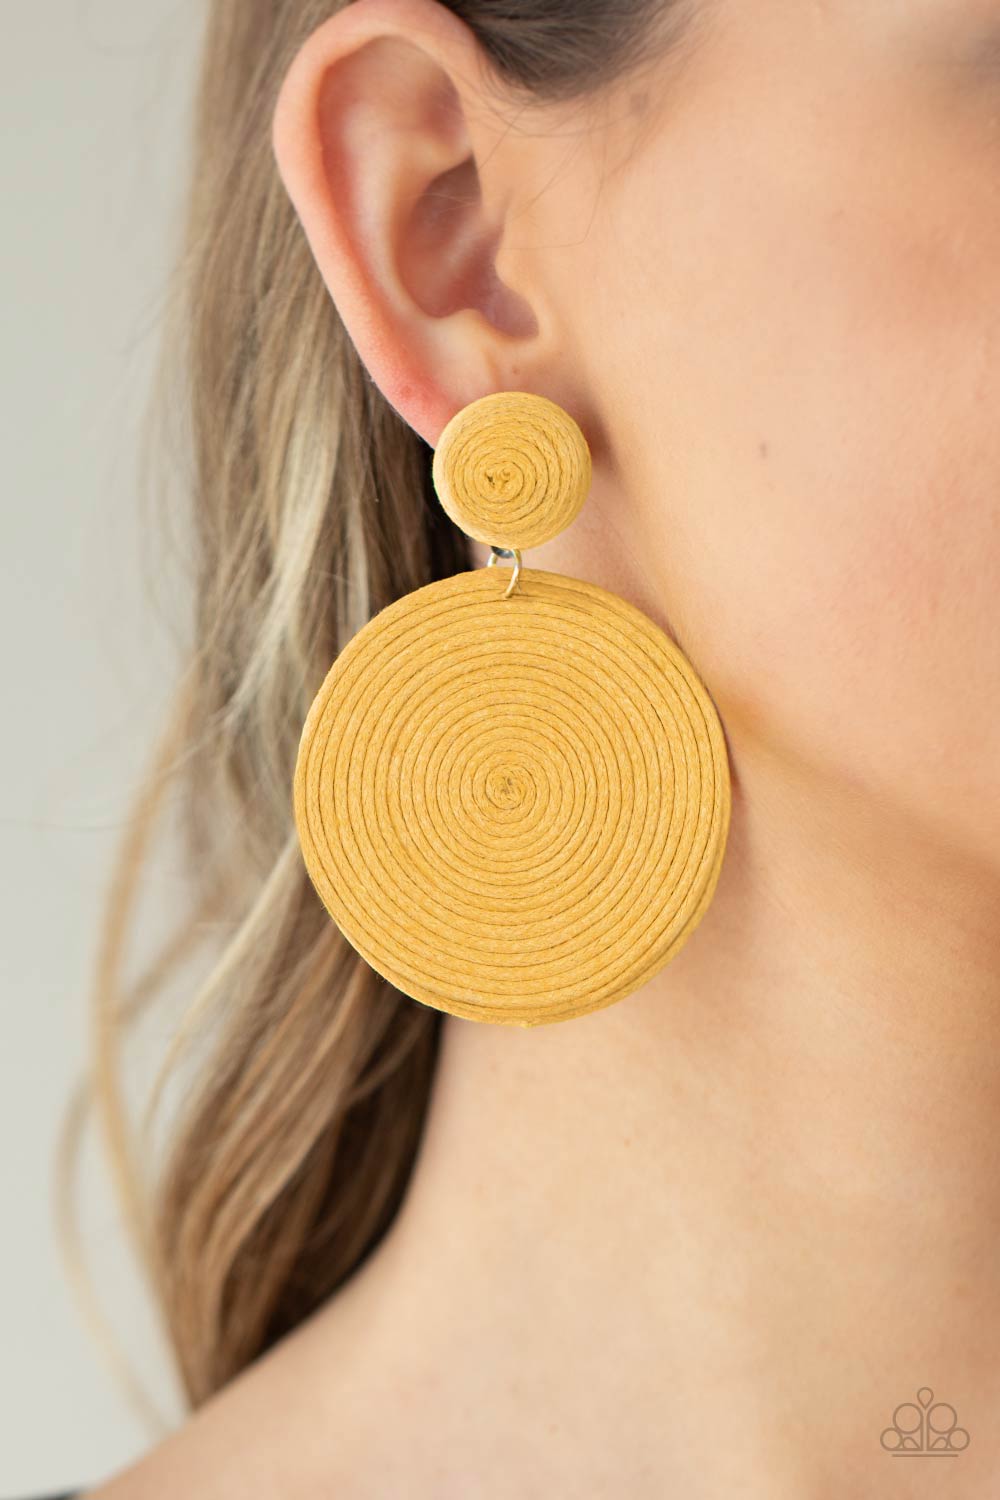 Circulate The Room - Yellow Earrings - Sabrina's Bling Collection